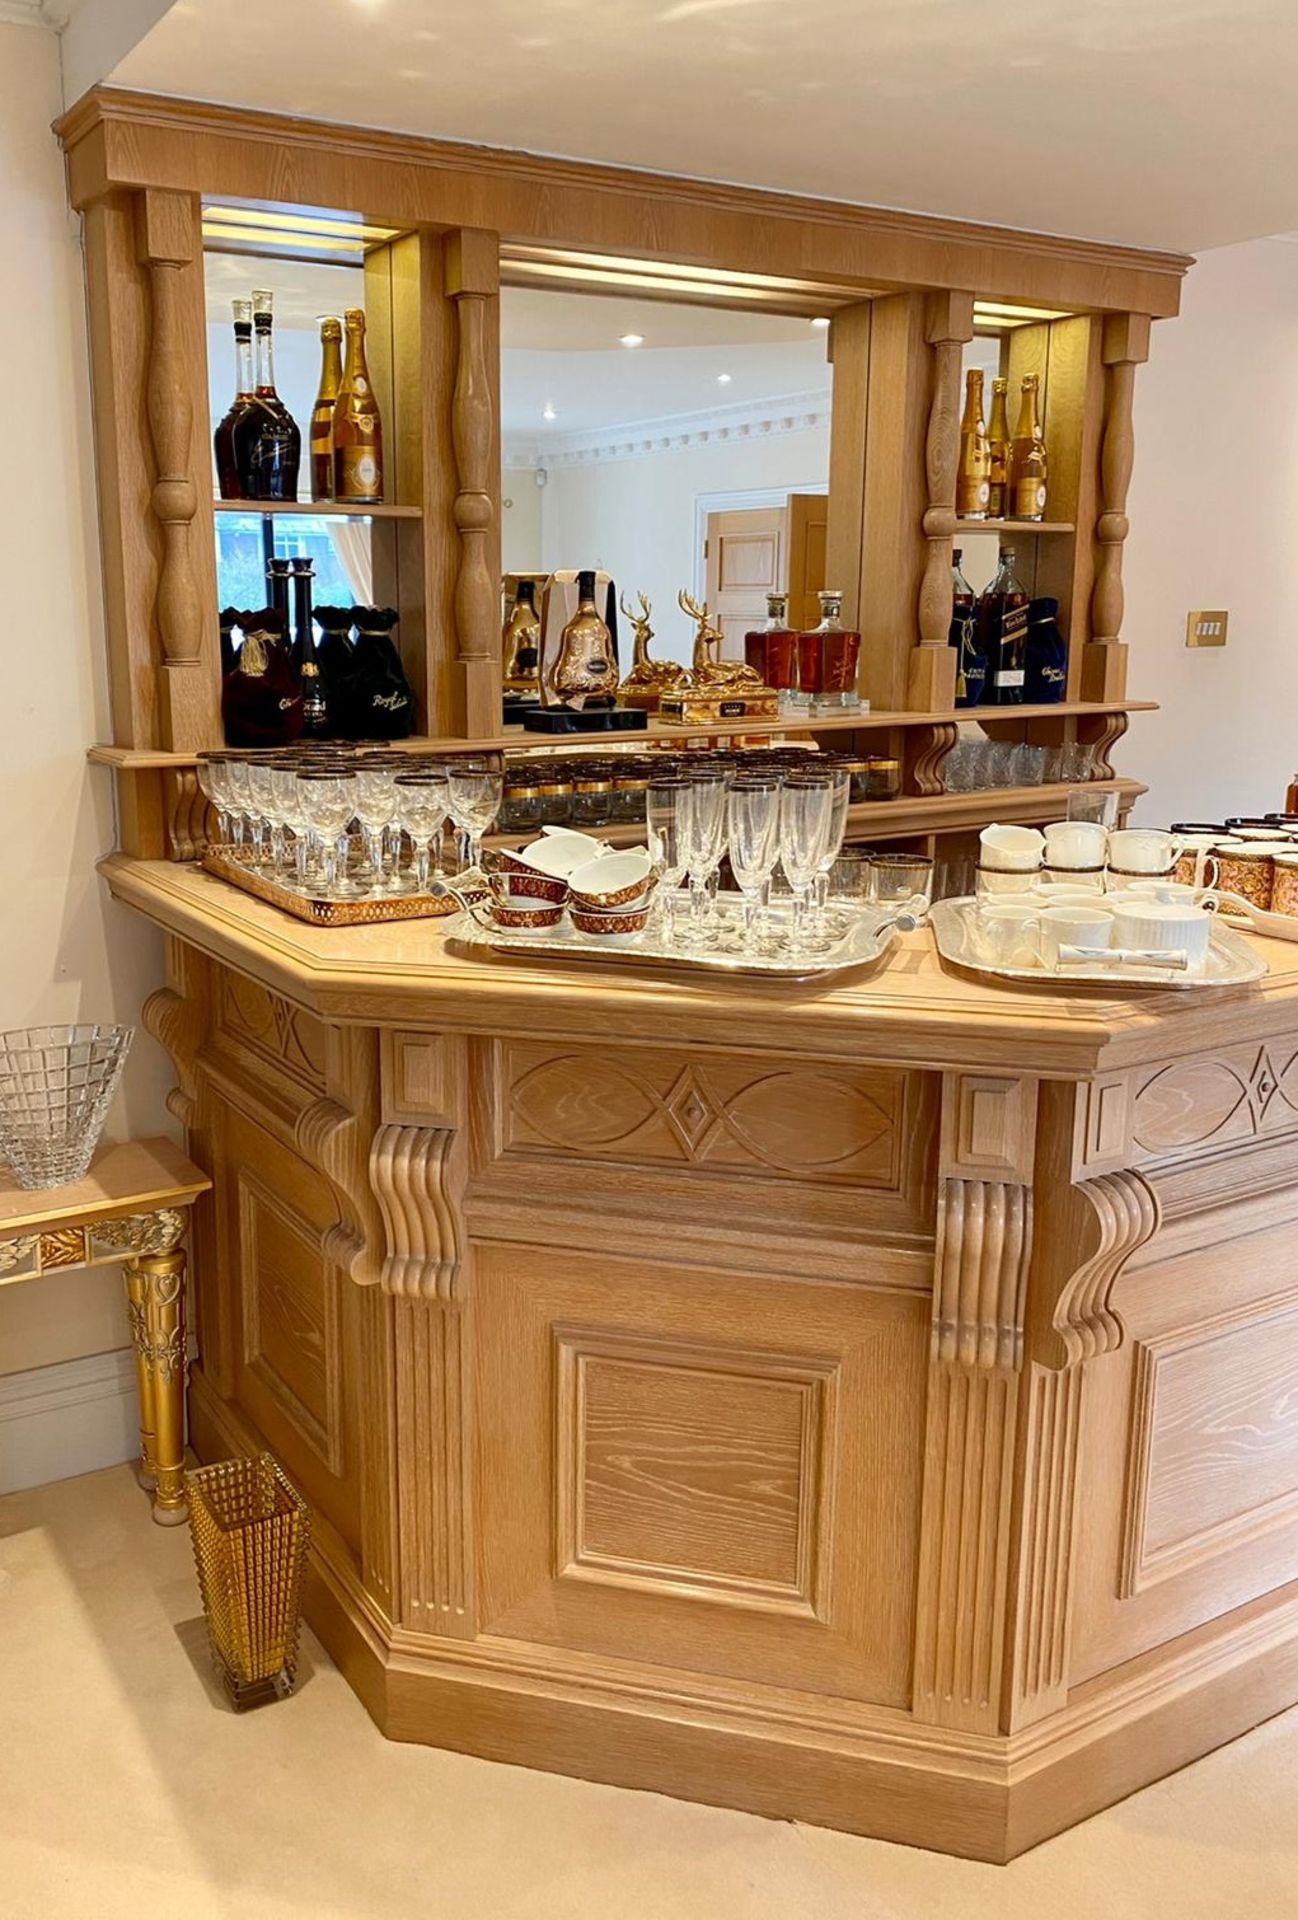 1 x Bespoke Solid Beech Home Bar With Backbar - Beautifully Crafted With Panelling and Curved - Image 4 of 25